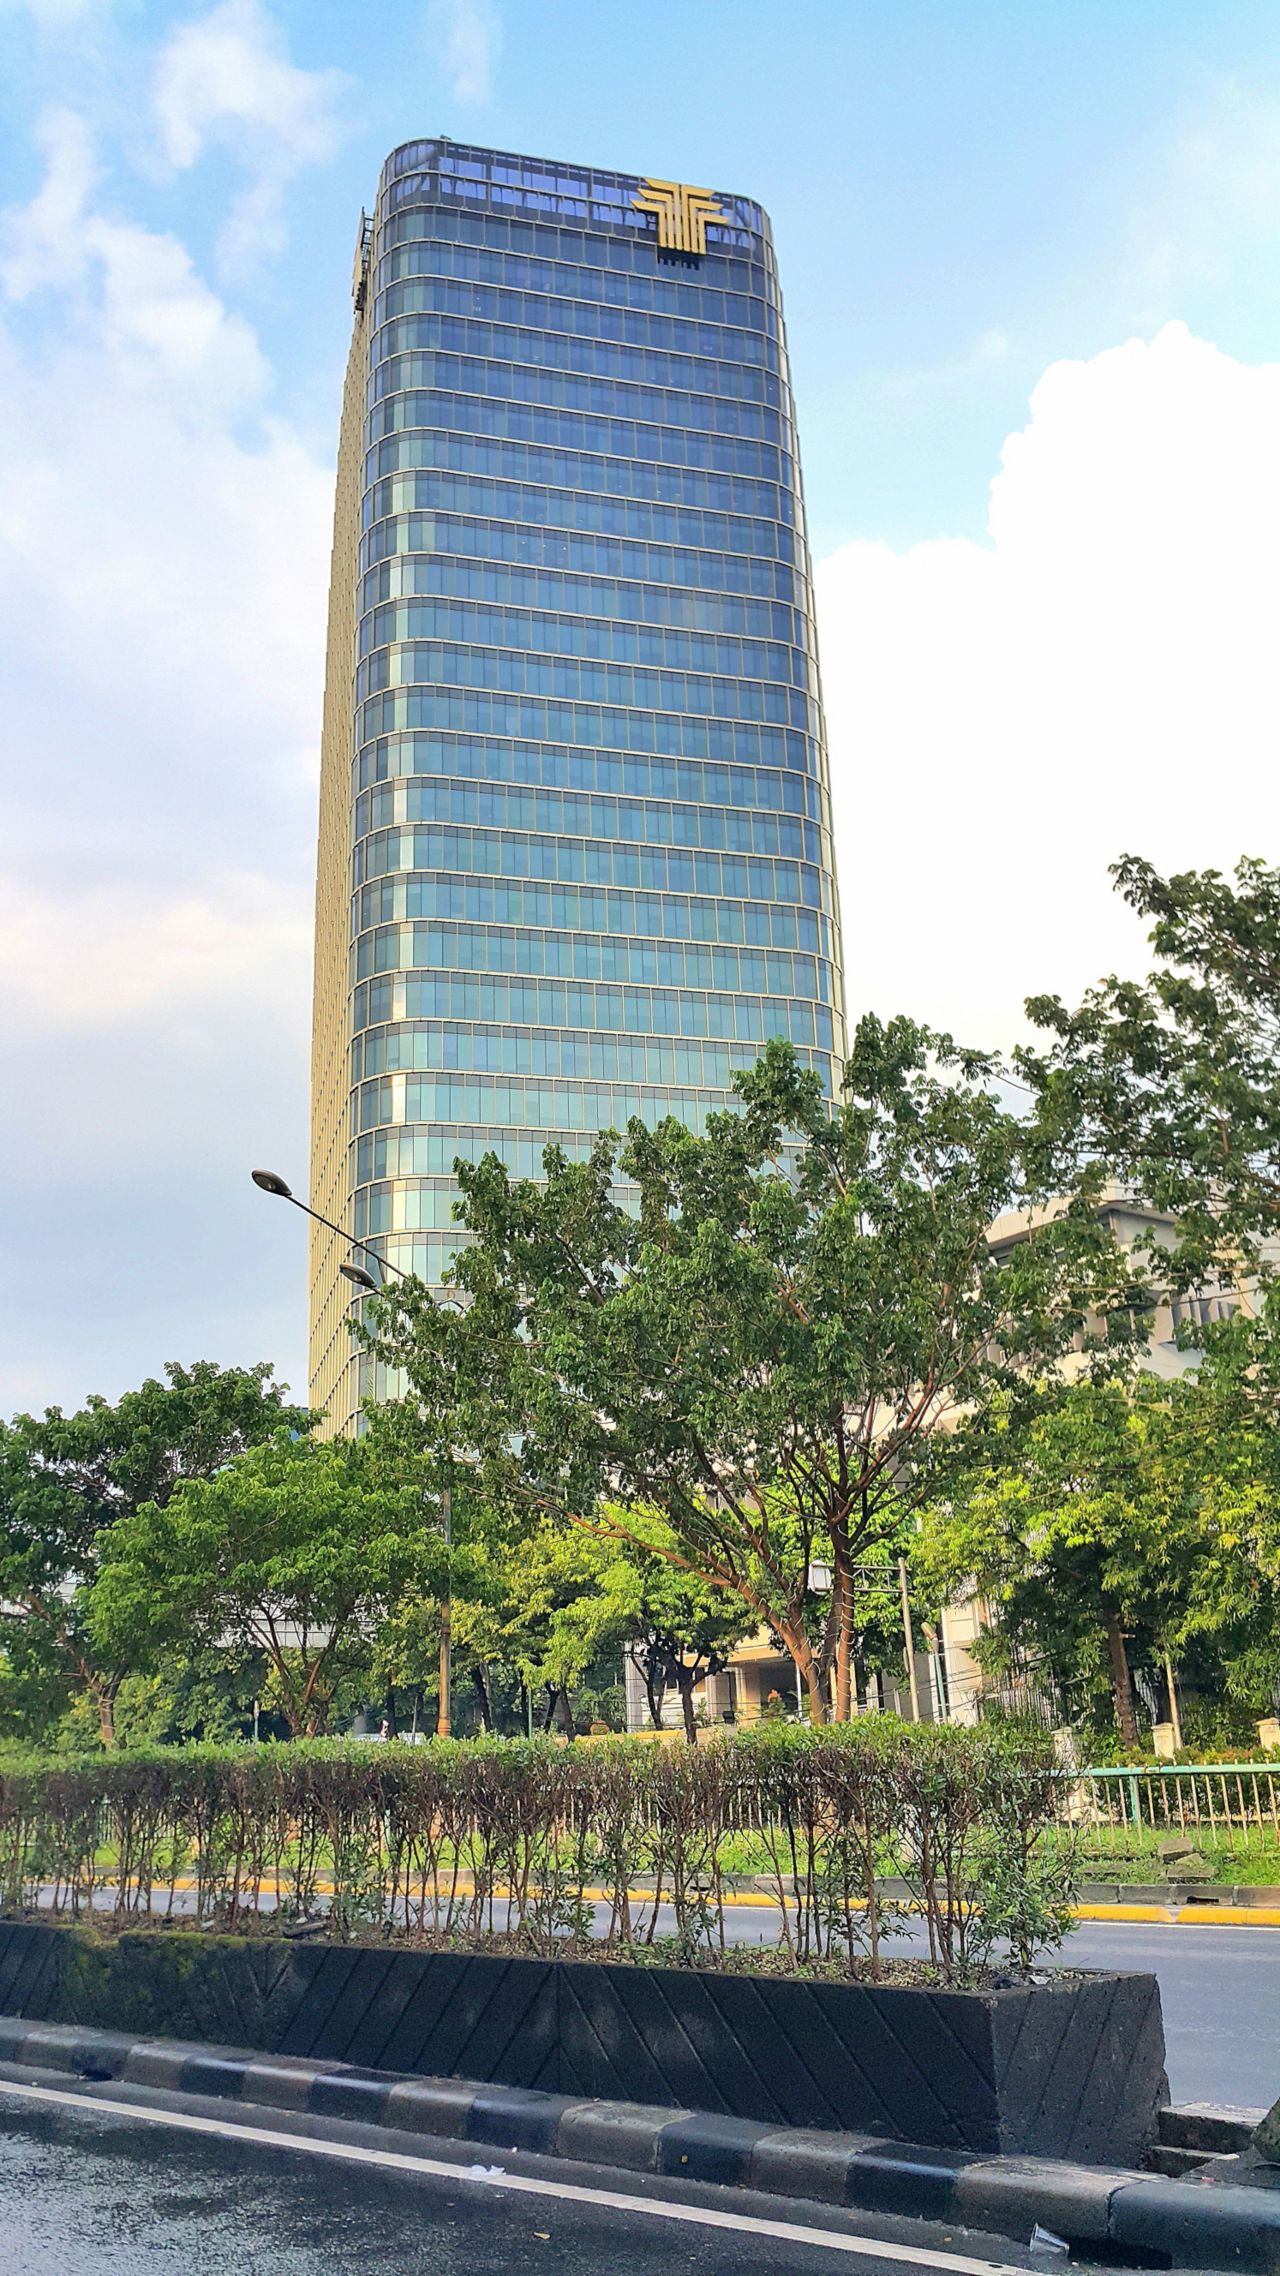 High rise tower with glass facade